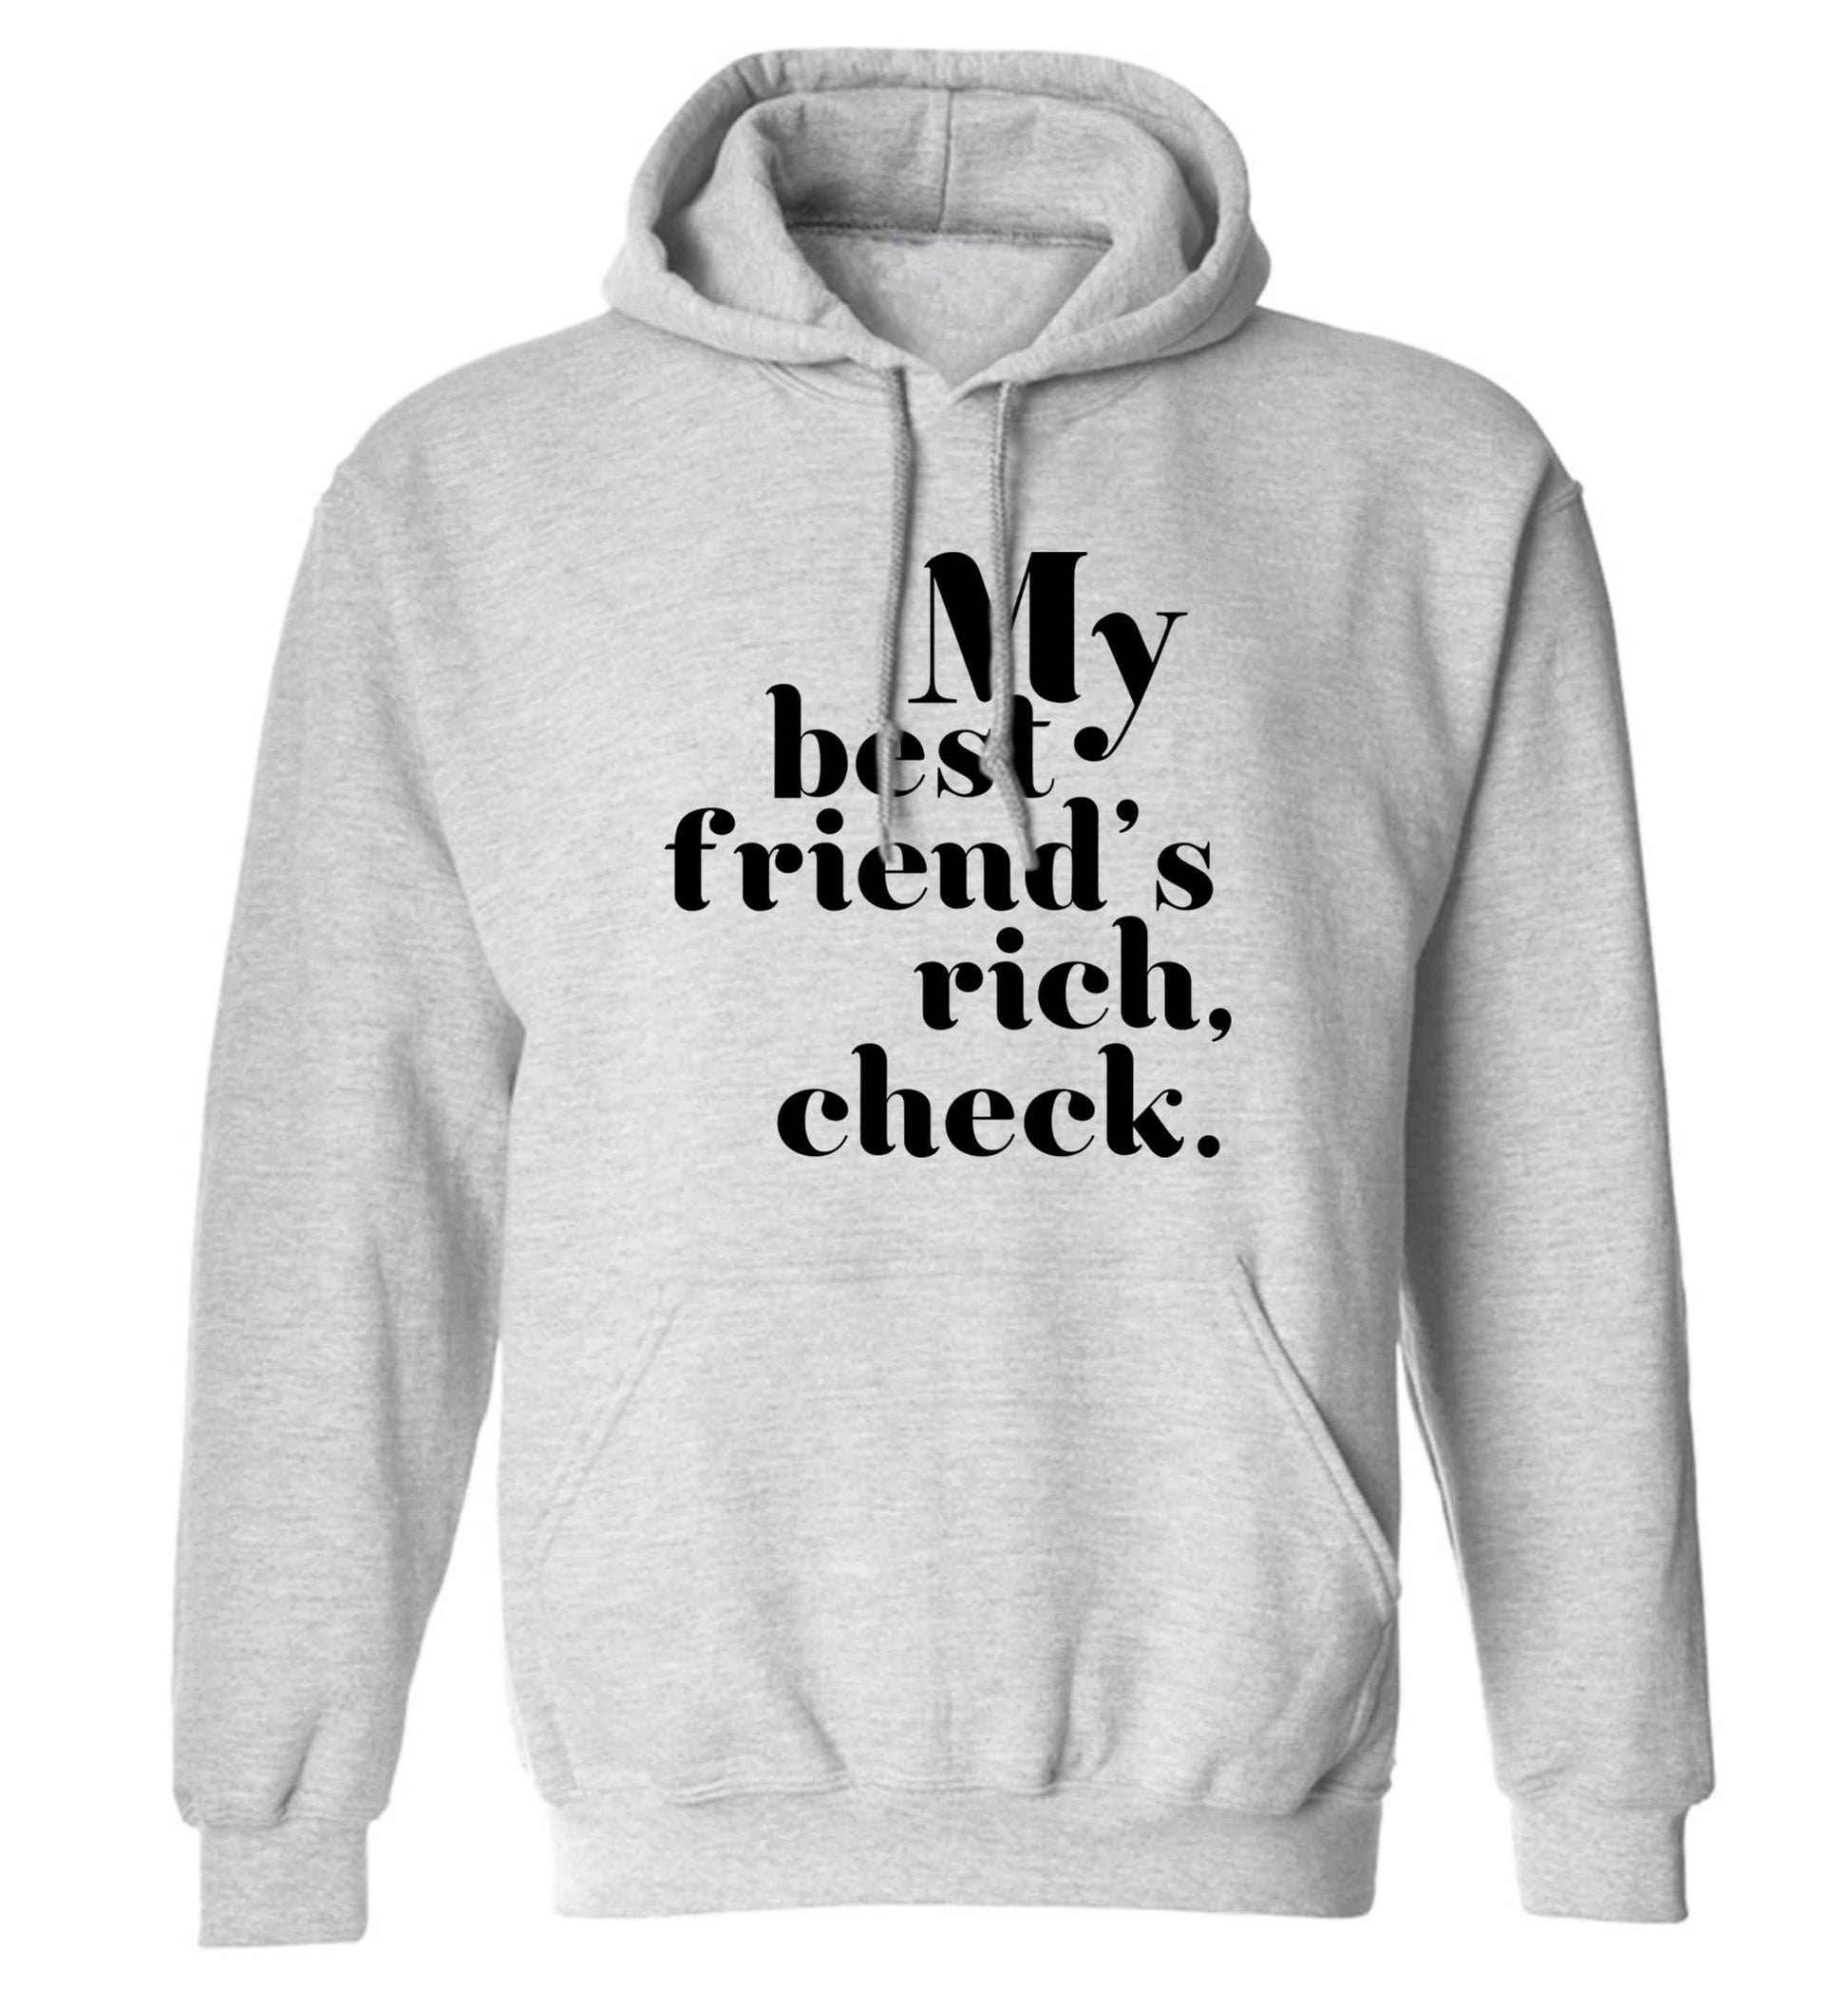 Got a rich best friend? Why not ask them to get you this, just let us  know and we'll tripple the price ;)  adults unisex grey hoodie 2XL